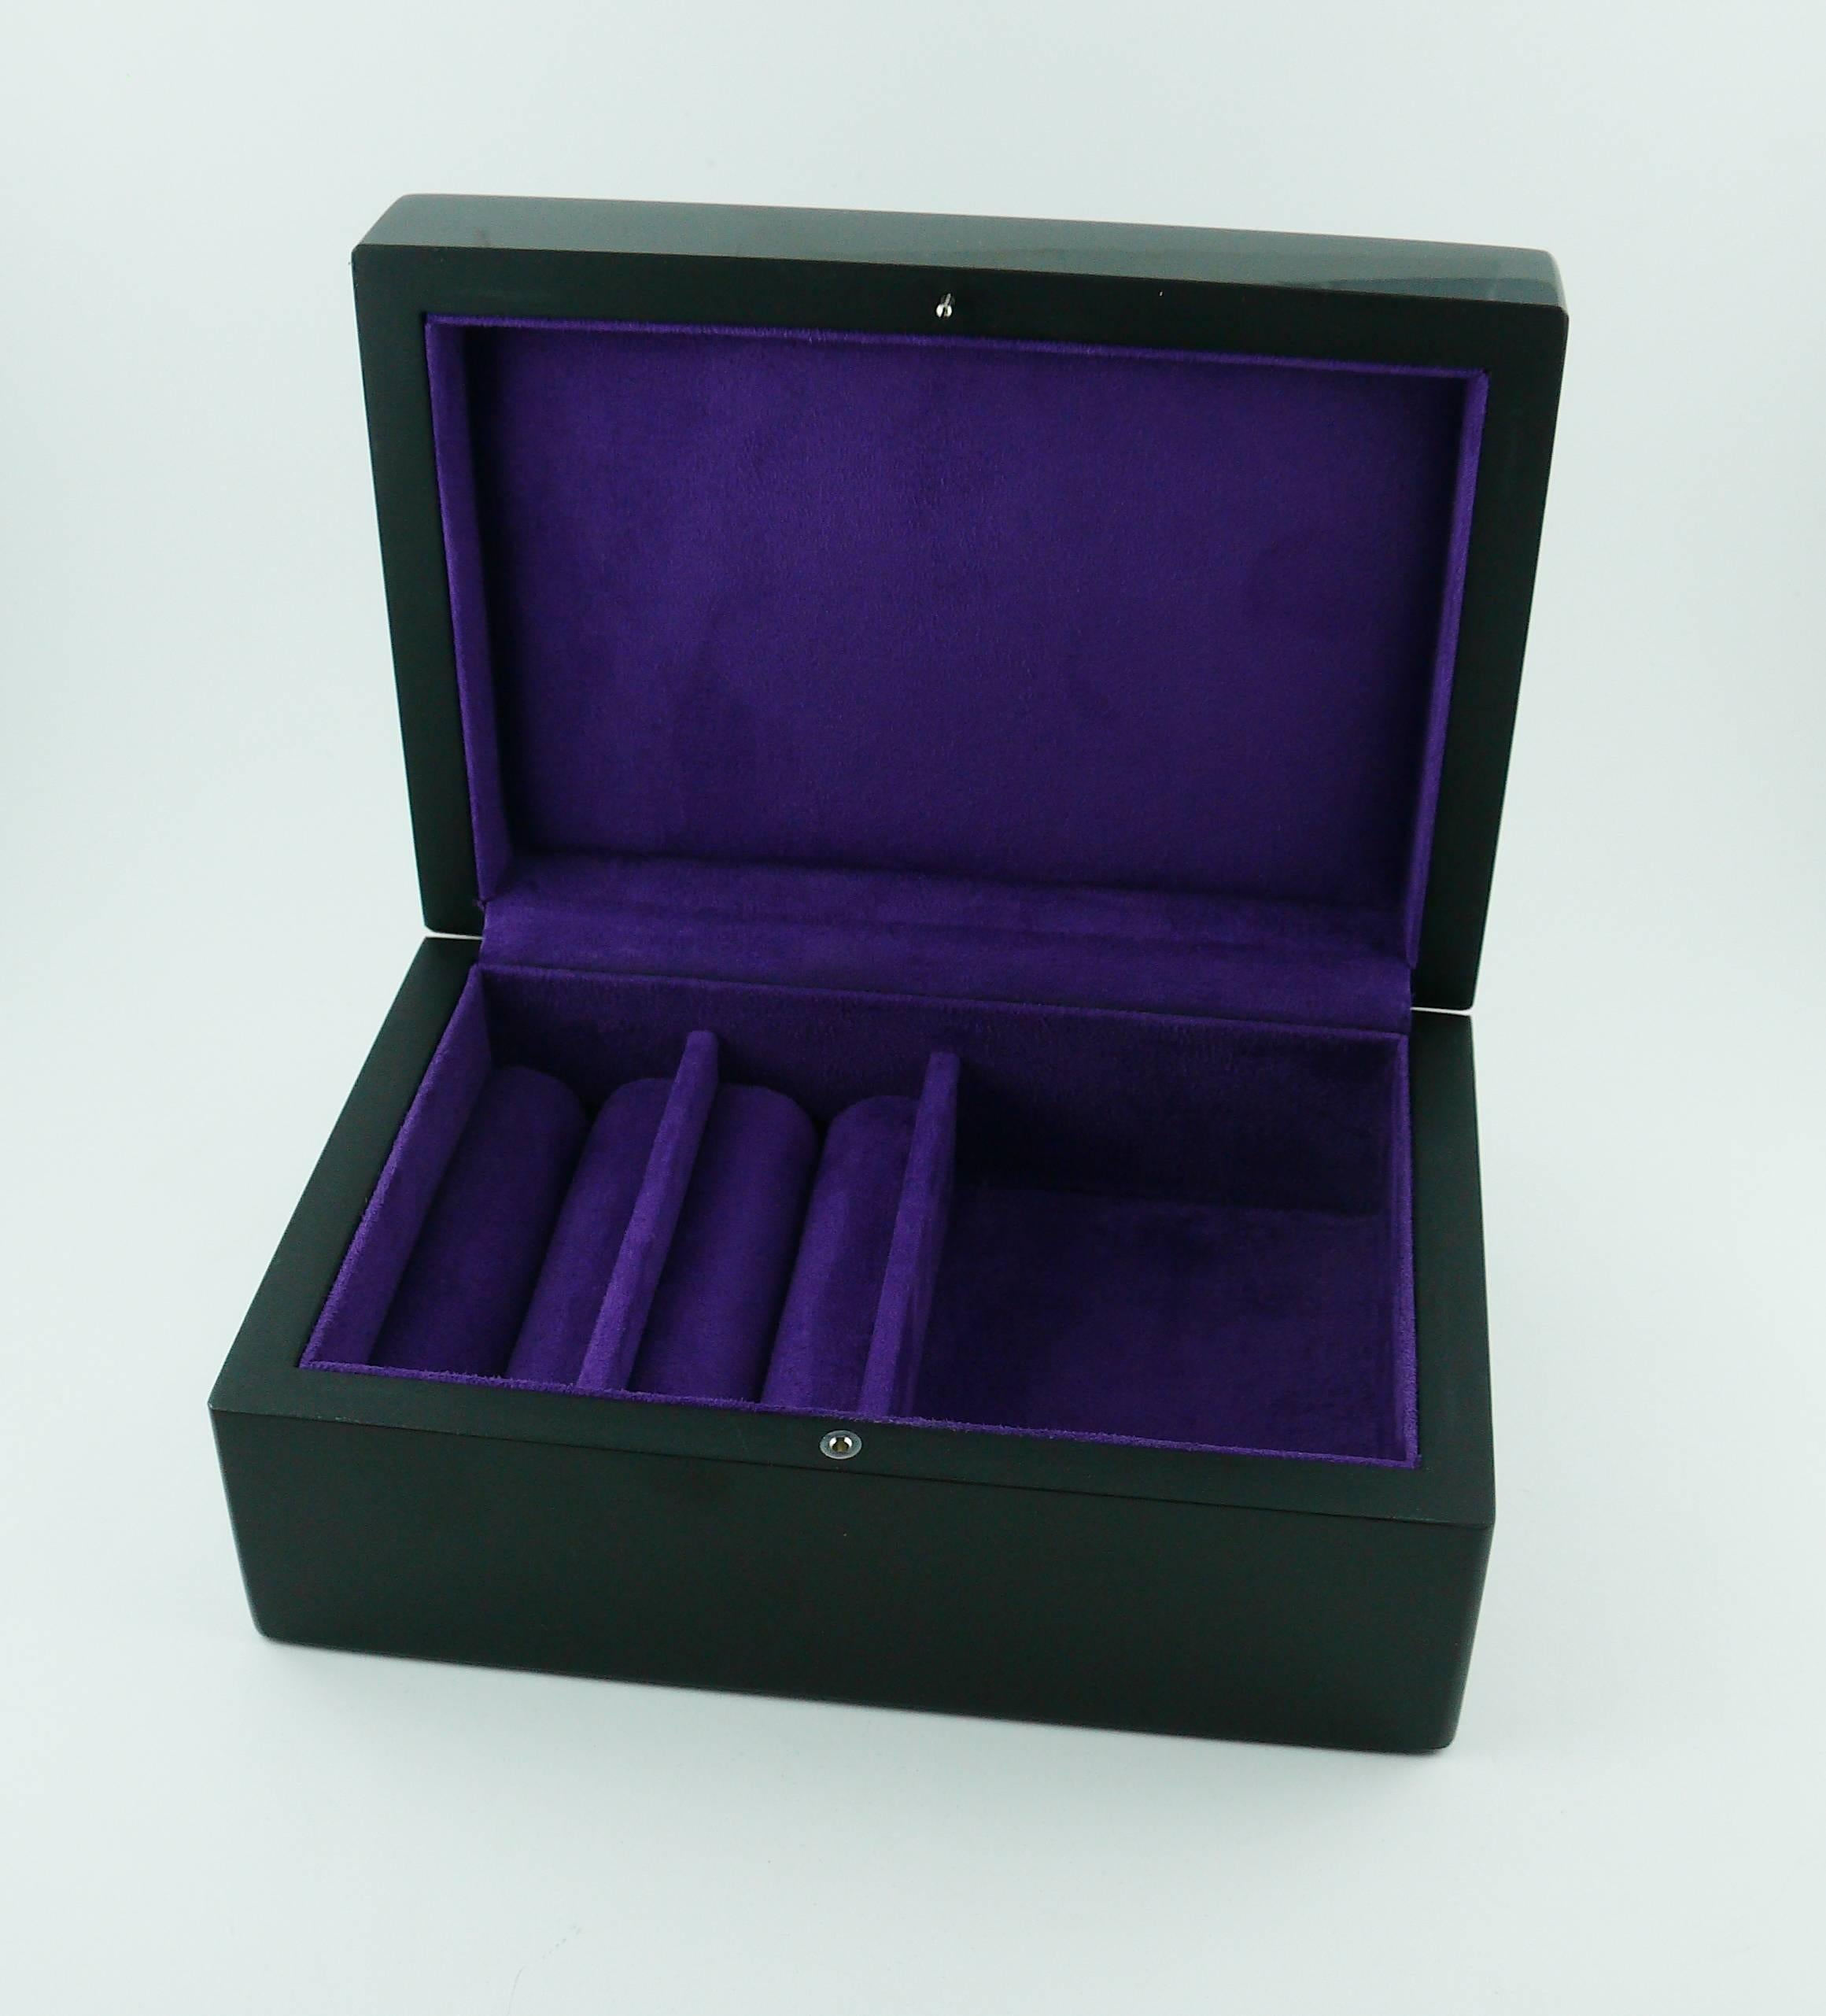 CHRISTIAN DIOR black resin jewelry box with purple suede interior.

Marked DIOR on cover.

Comes with original DIOR box (used).

Indicative measurements : length approx. 17 cm (6.69 inches) / width approx. 12 cm (4.72 inches) / height approx. 6.9 cm